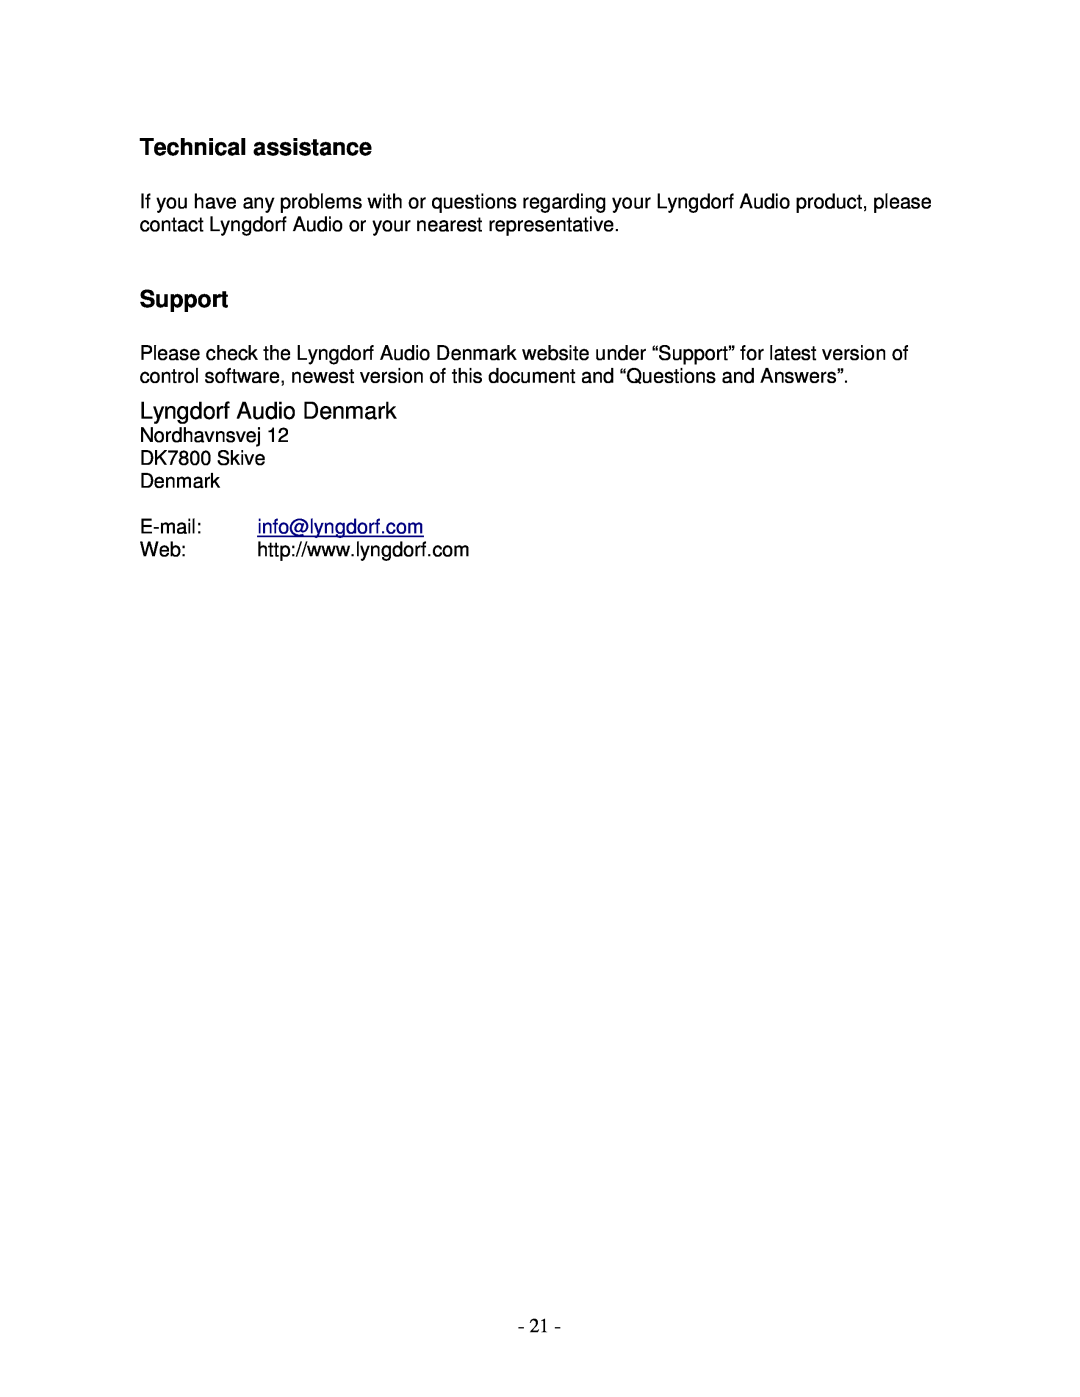 Lyngdorf Audio CD-1 owner manual Technical assistance, Support, Lyngdorf Audio Denmark 